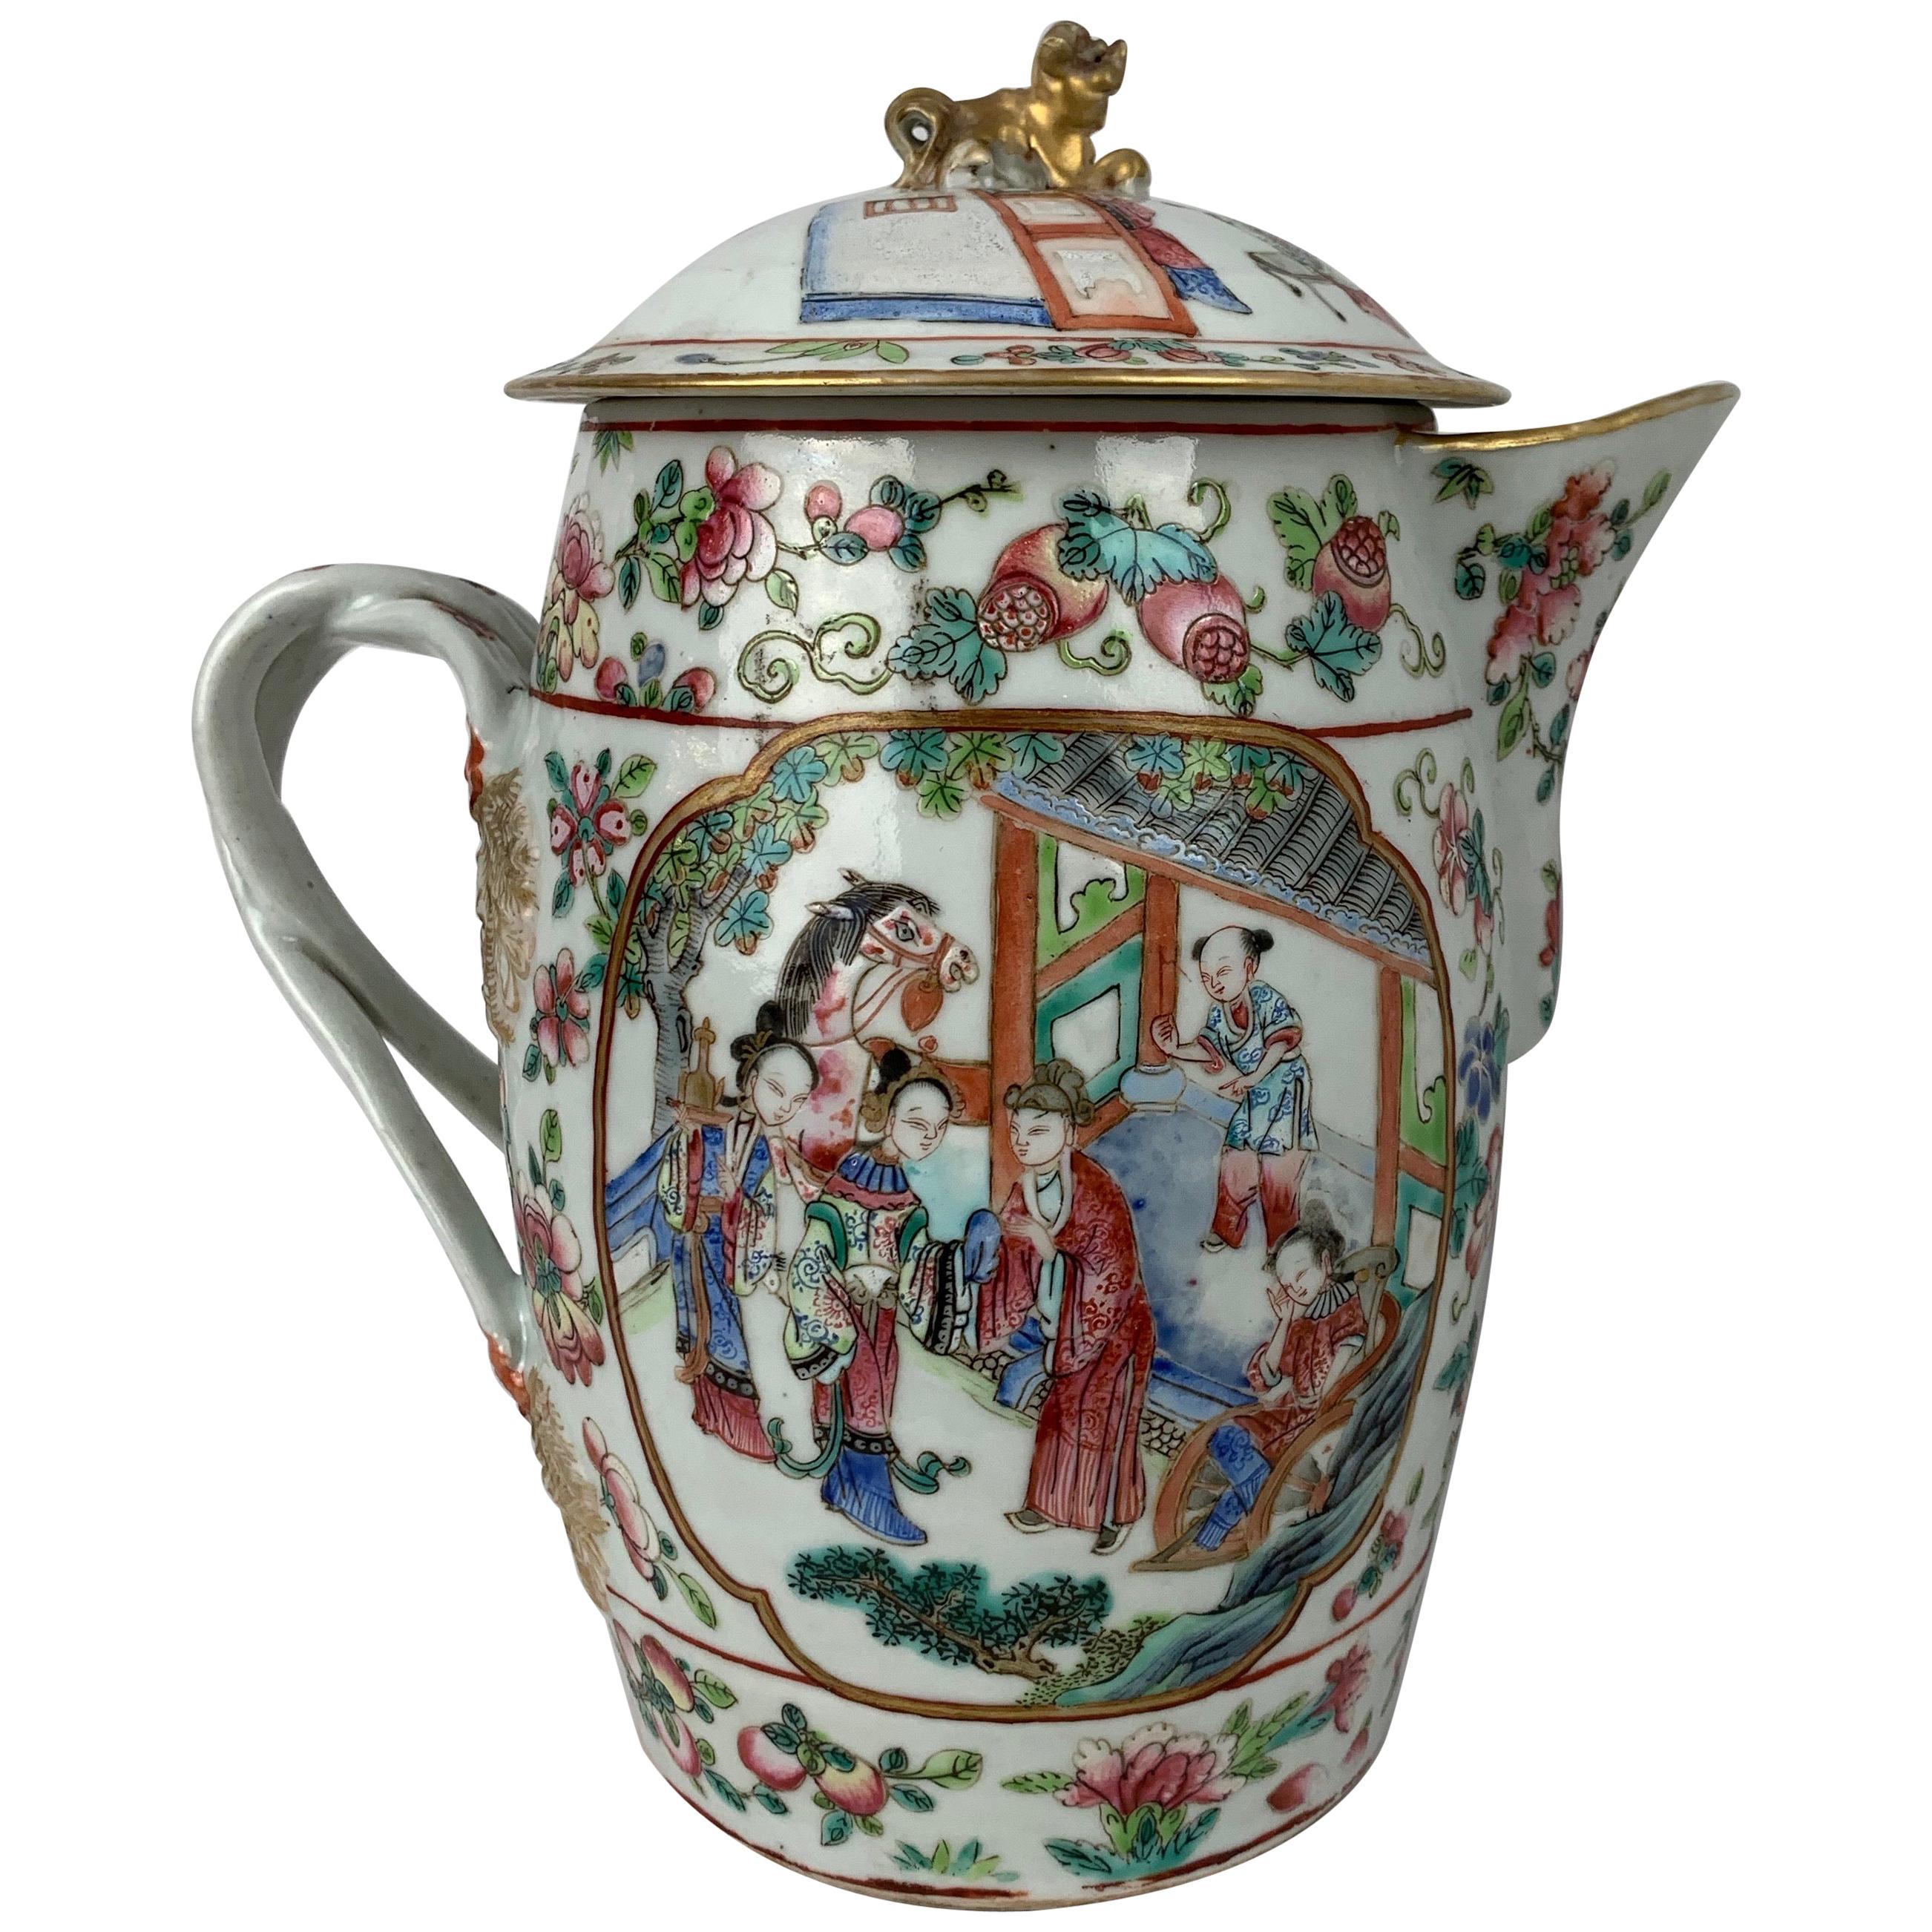 Cider Jug with Cover, Famille Rose Porcelain, Chinese Export, 19th Century